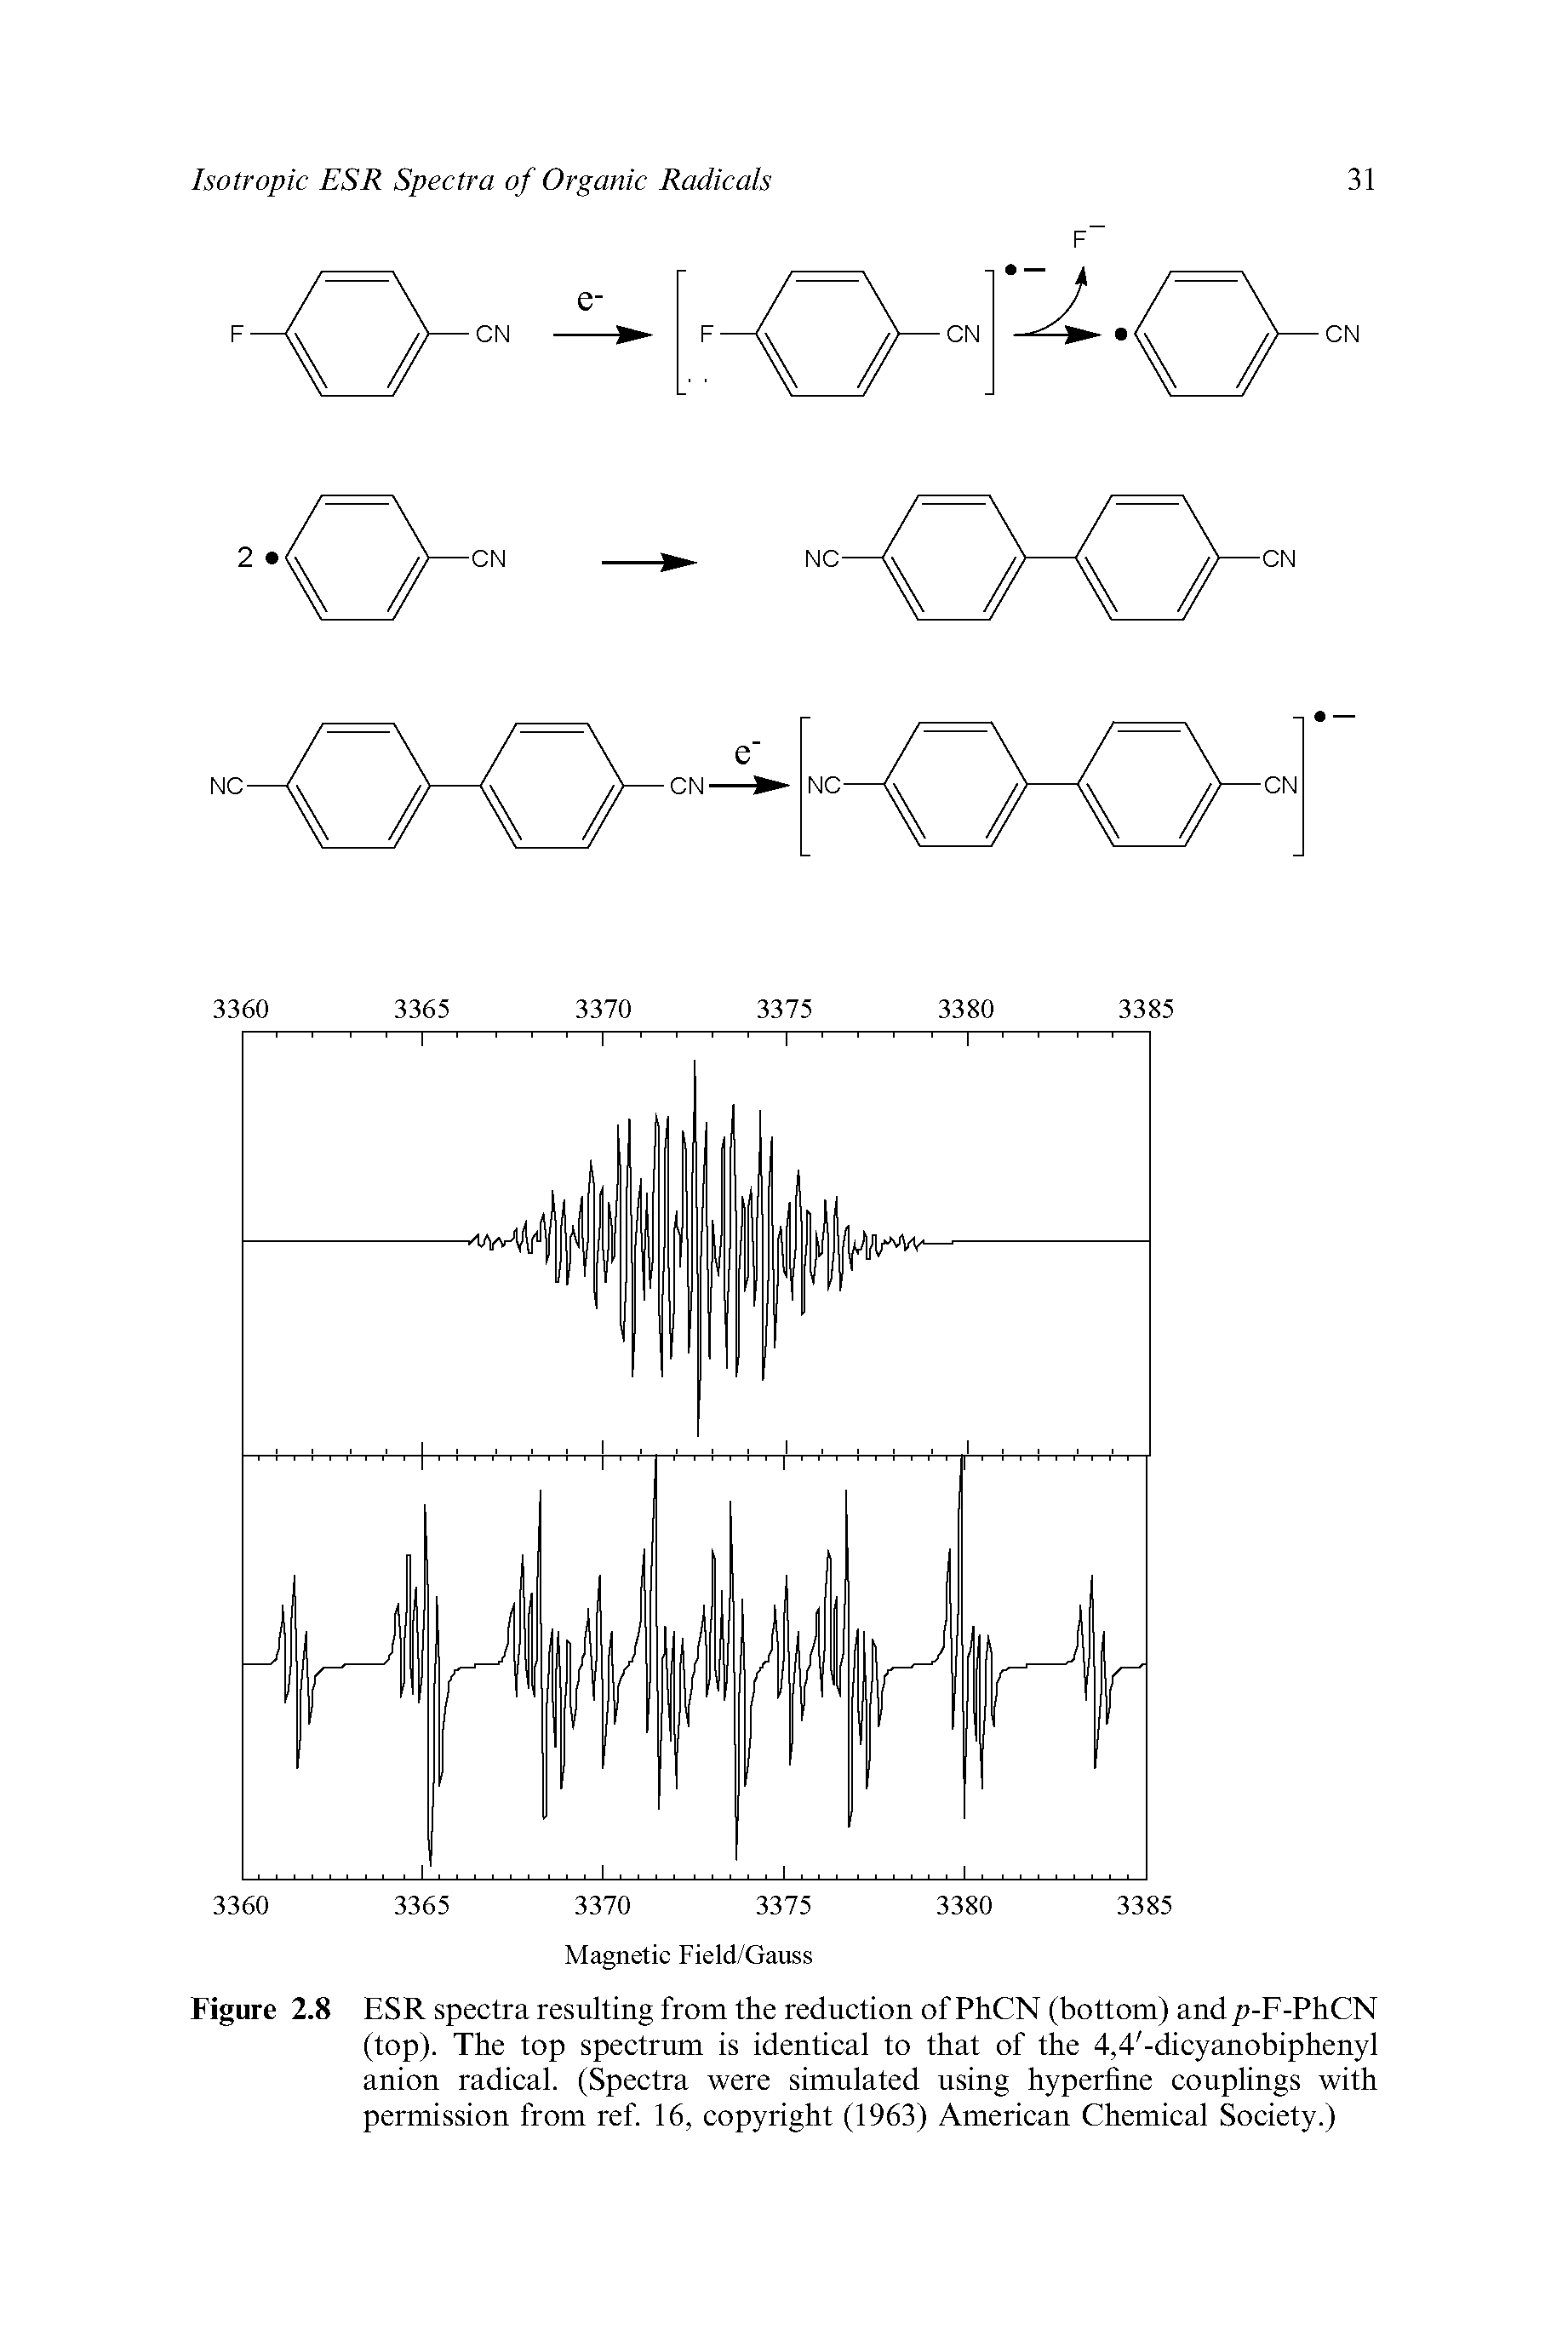 Figure 2.8 ESR spectra resulting from the reduction of PhCN (bottom) and />-F-PhCN (top). The top spectrum is identical to that of the 4,4 -dicyanobiphenyl anion radical. (Spectra were simulated using hyperfine couplings with permission from ref. 16, copyright (1963) American Chemical Society.)...